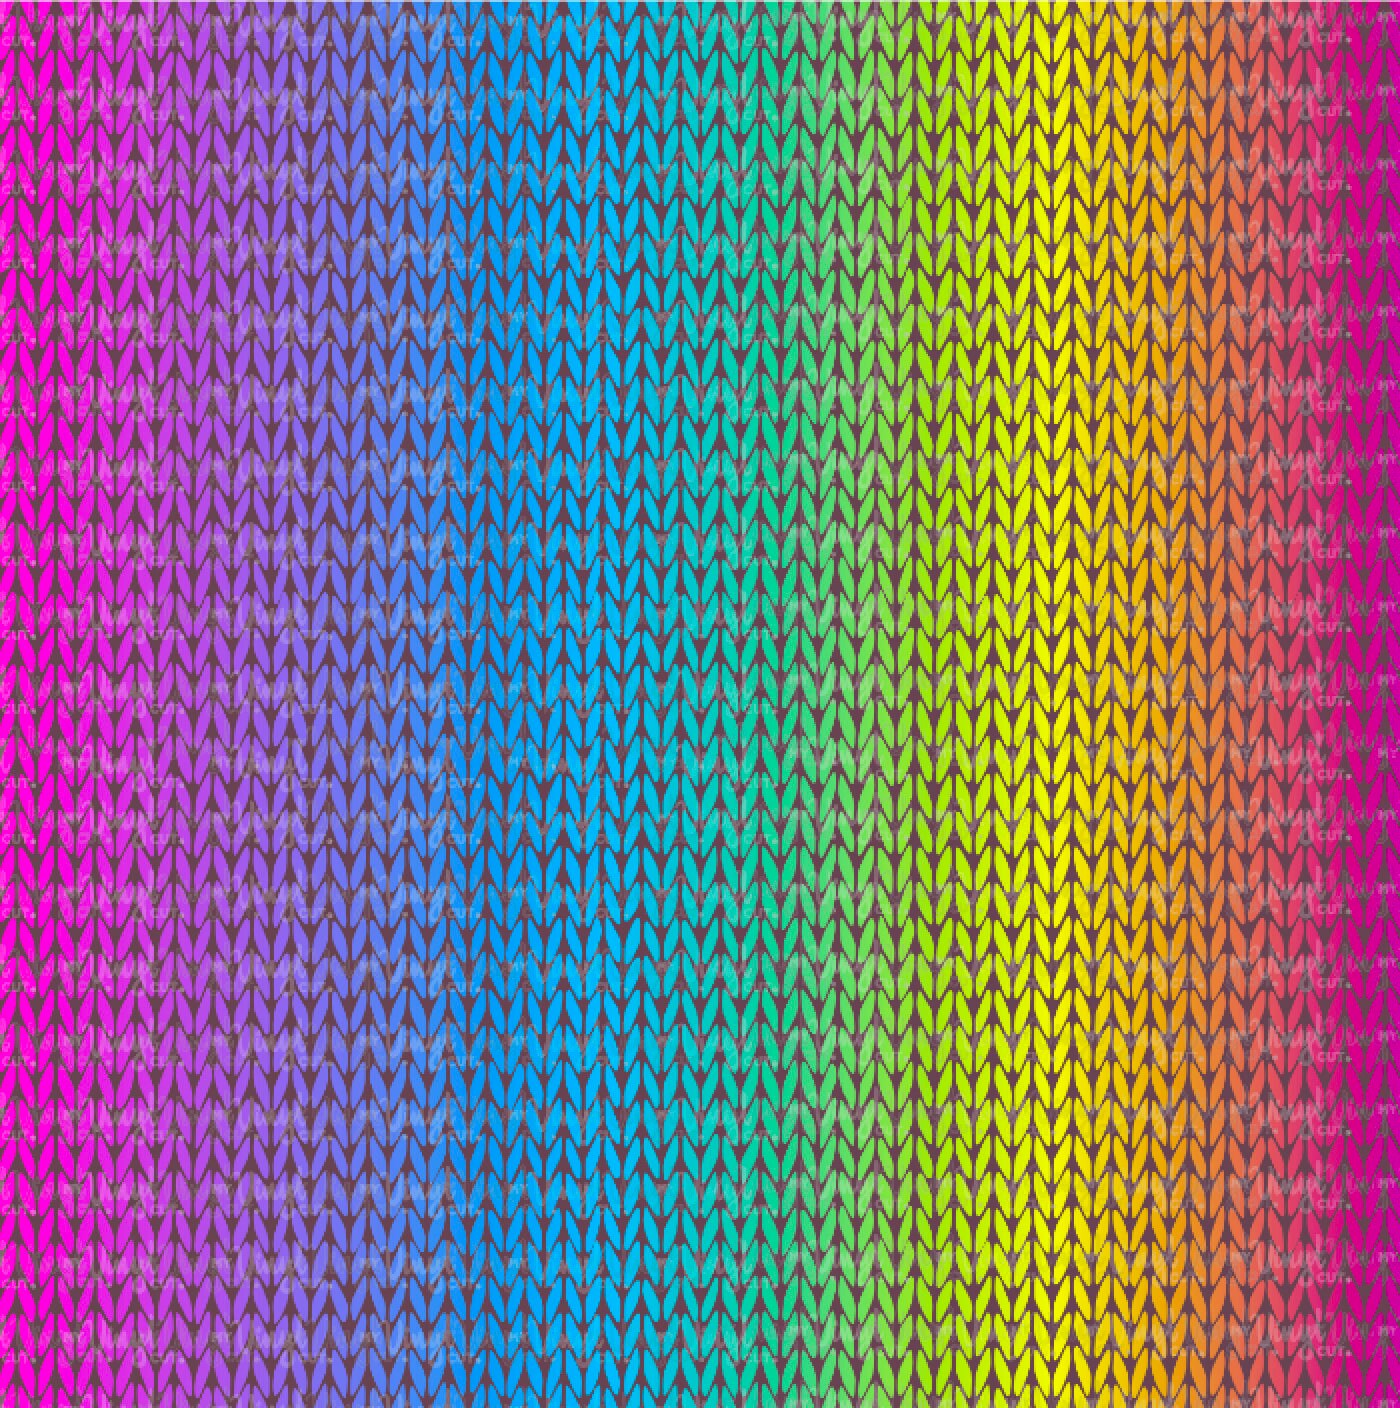 Pastel Rainbow Ombre Pattern Vinyl Sheet in HTV or Adhesive Vinyl,  Repeating Gradient Patterned Vinyl, Easter Spring Colors HTV3128 